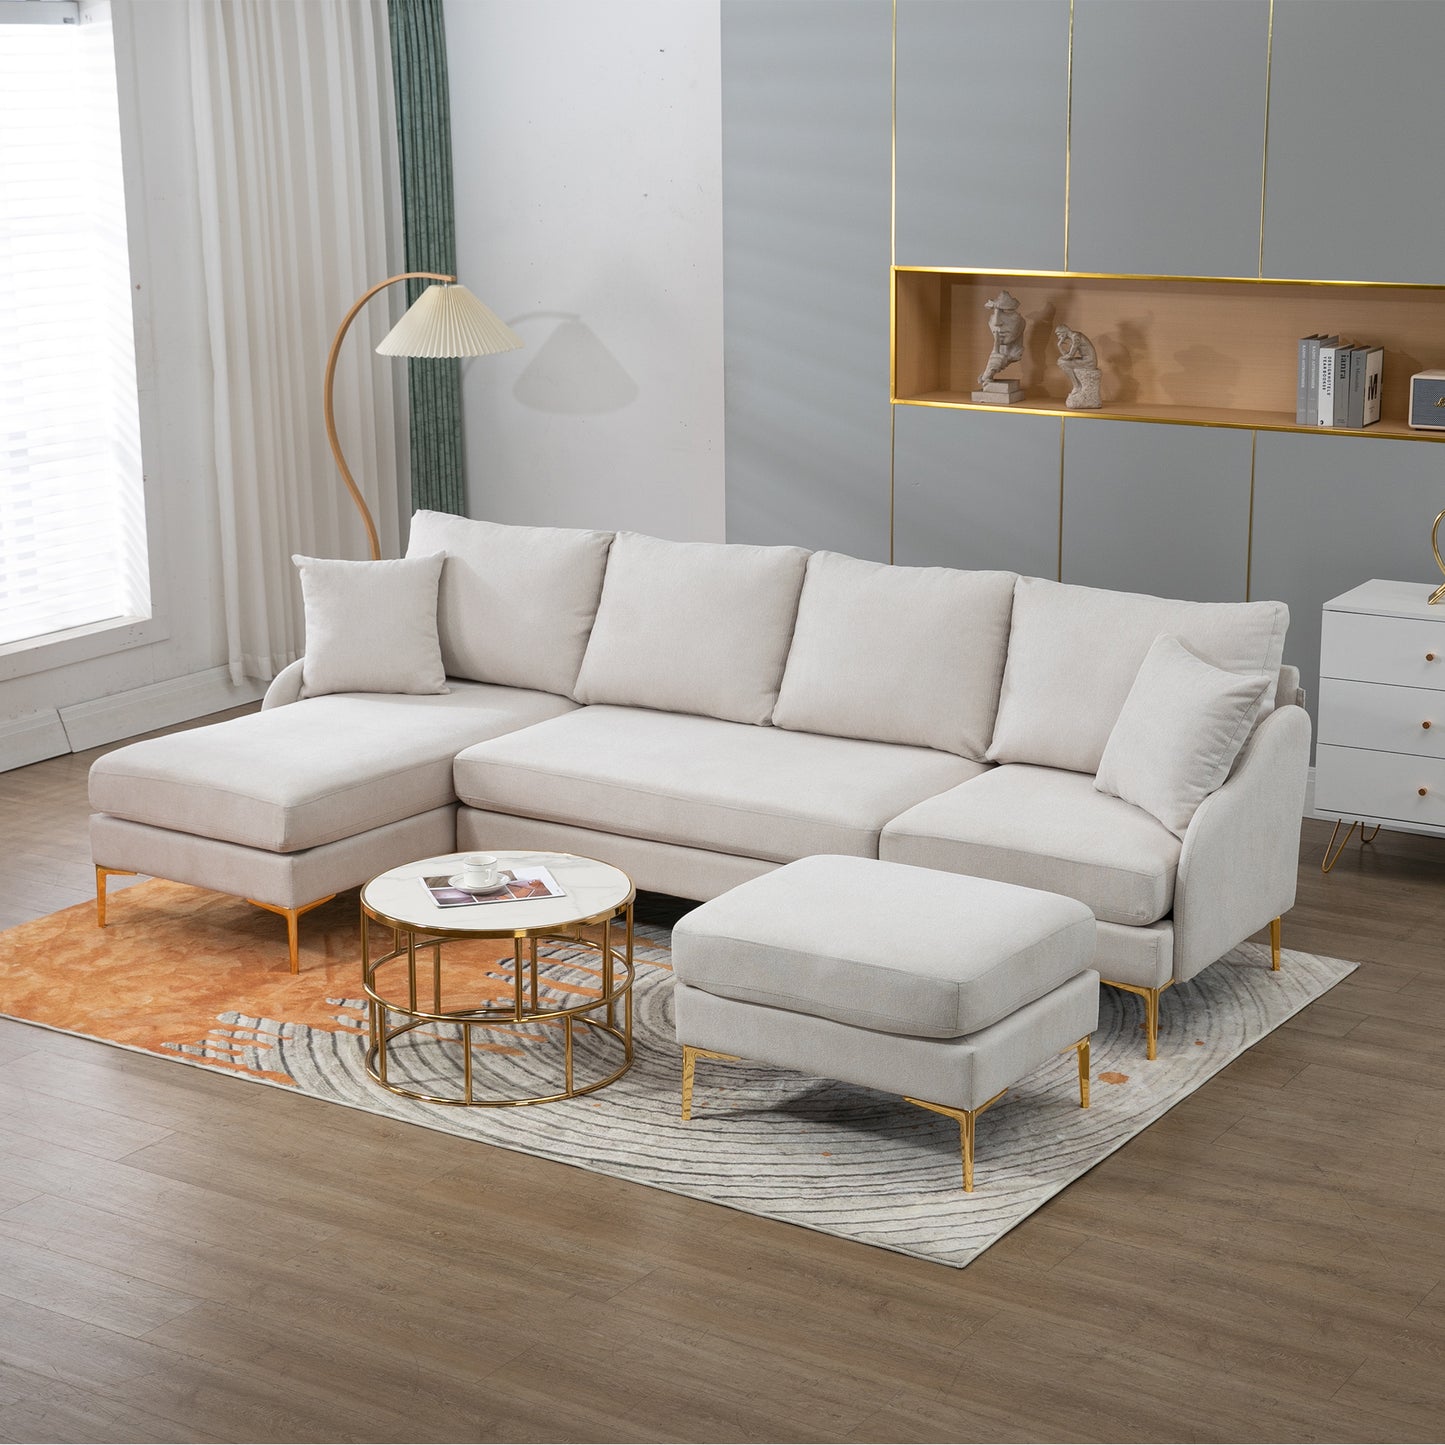 110'' Wide Reversible Sectional Sofa with Chaise Lounge - Beige Polyester Blend